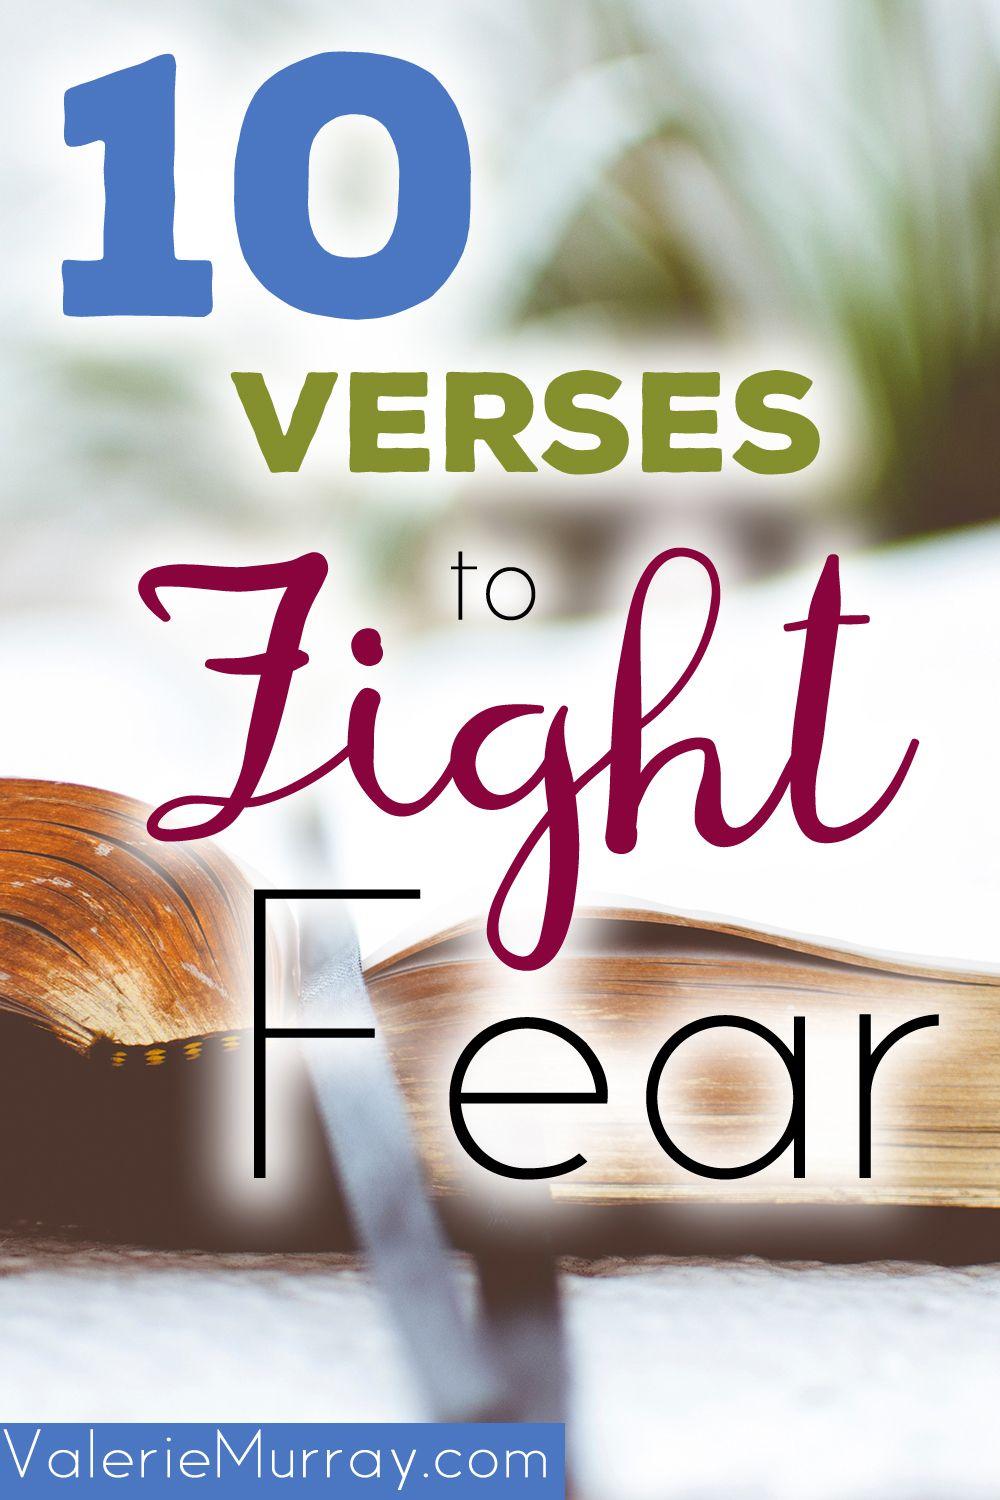 Printable Fear of God Logo - 10 Verses to Fight Fear (free printable | Truths, Thoughts and Verses